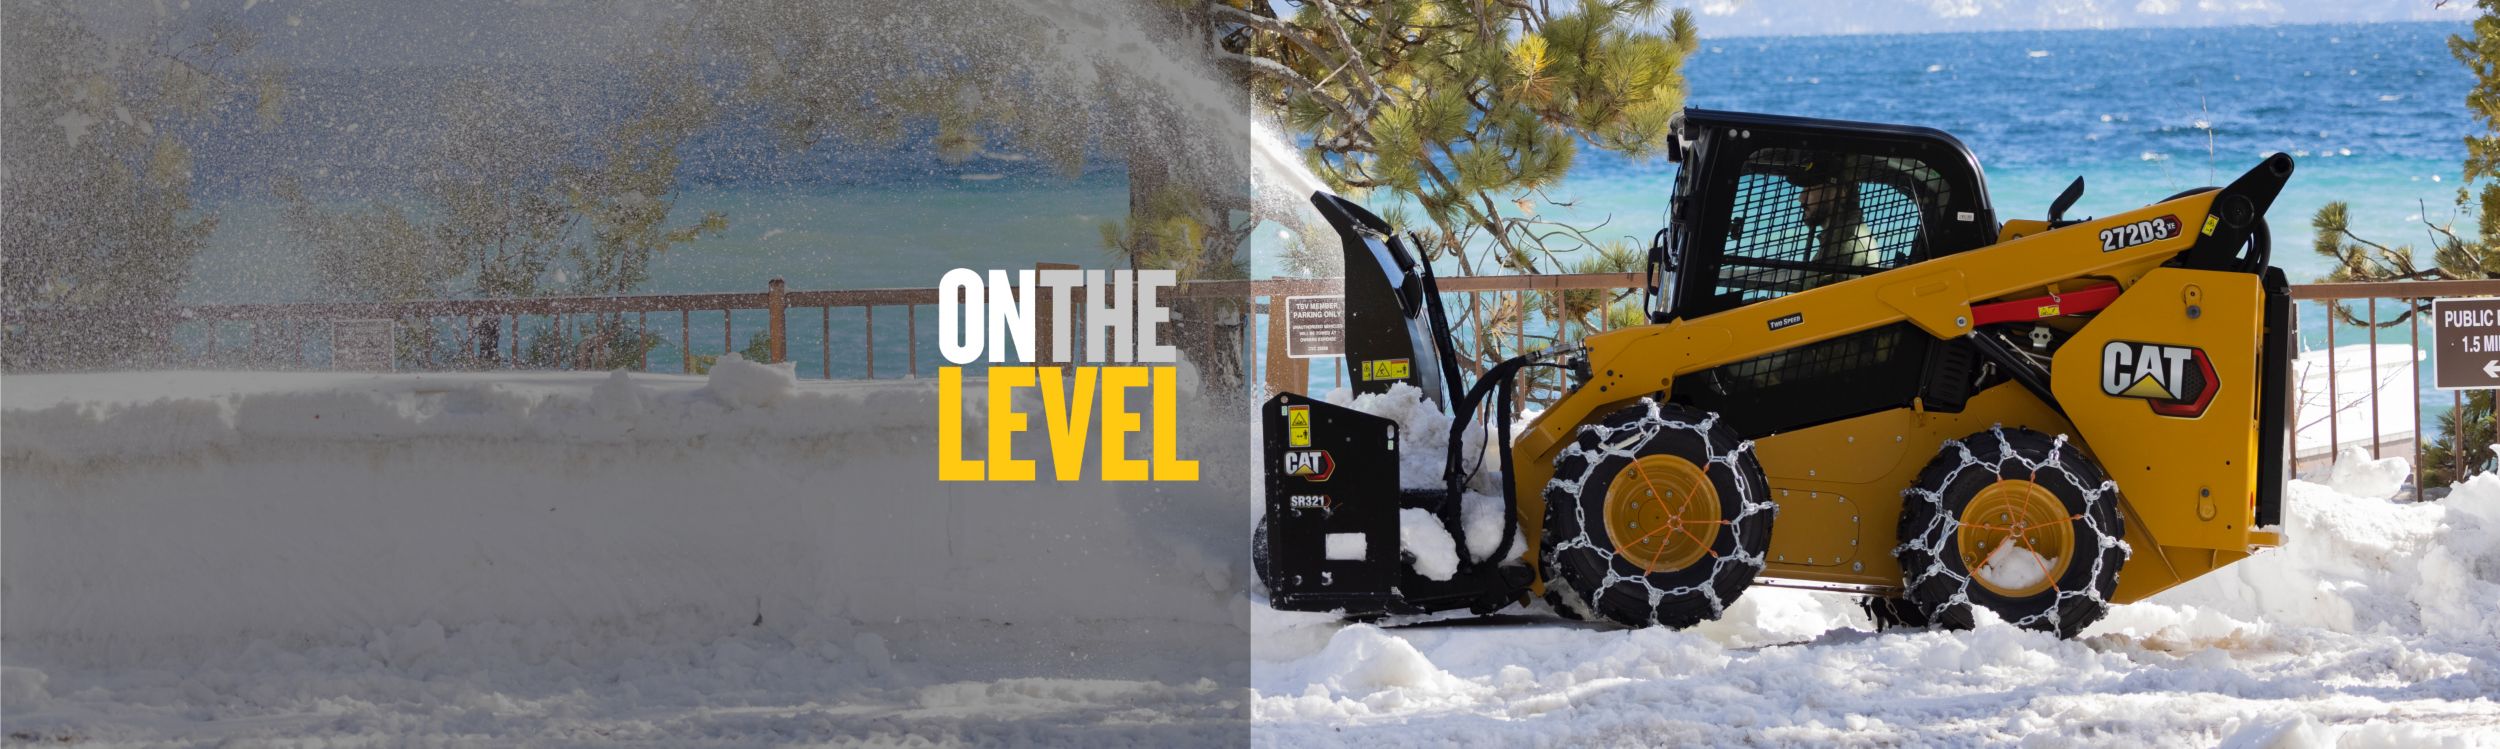 Snow Removal Technology: Advancements and Innovations for